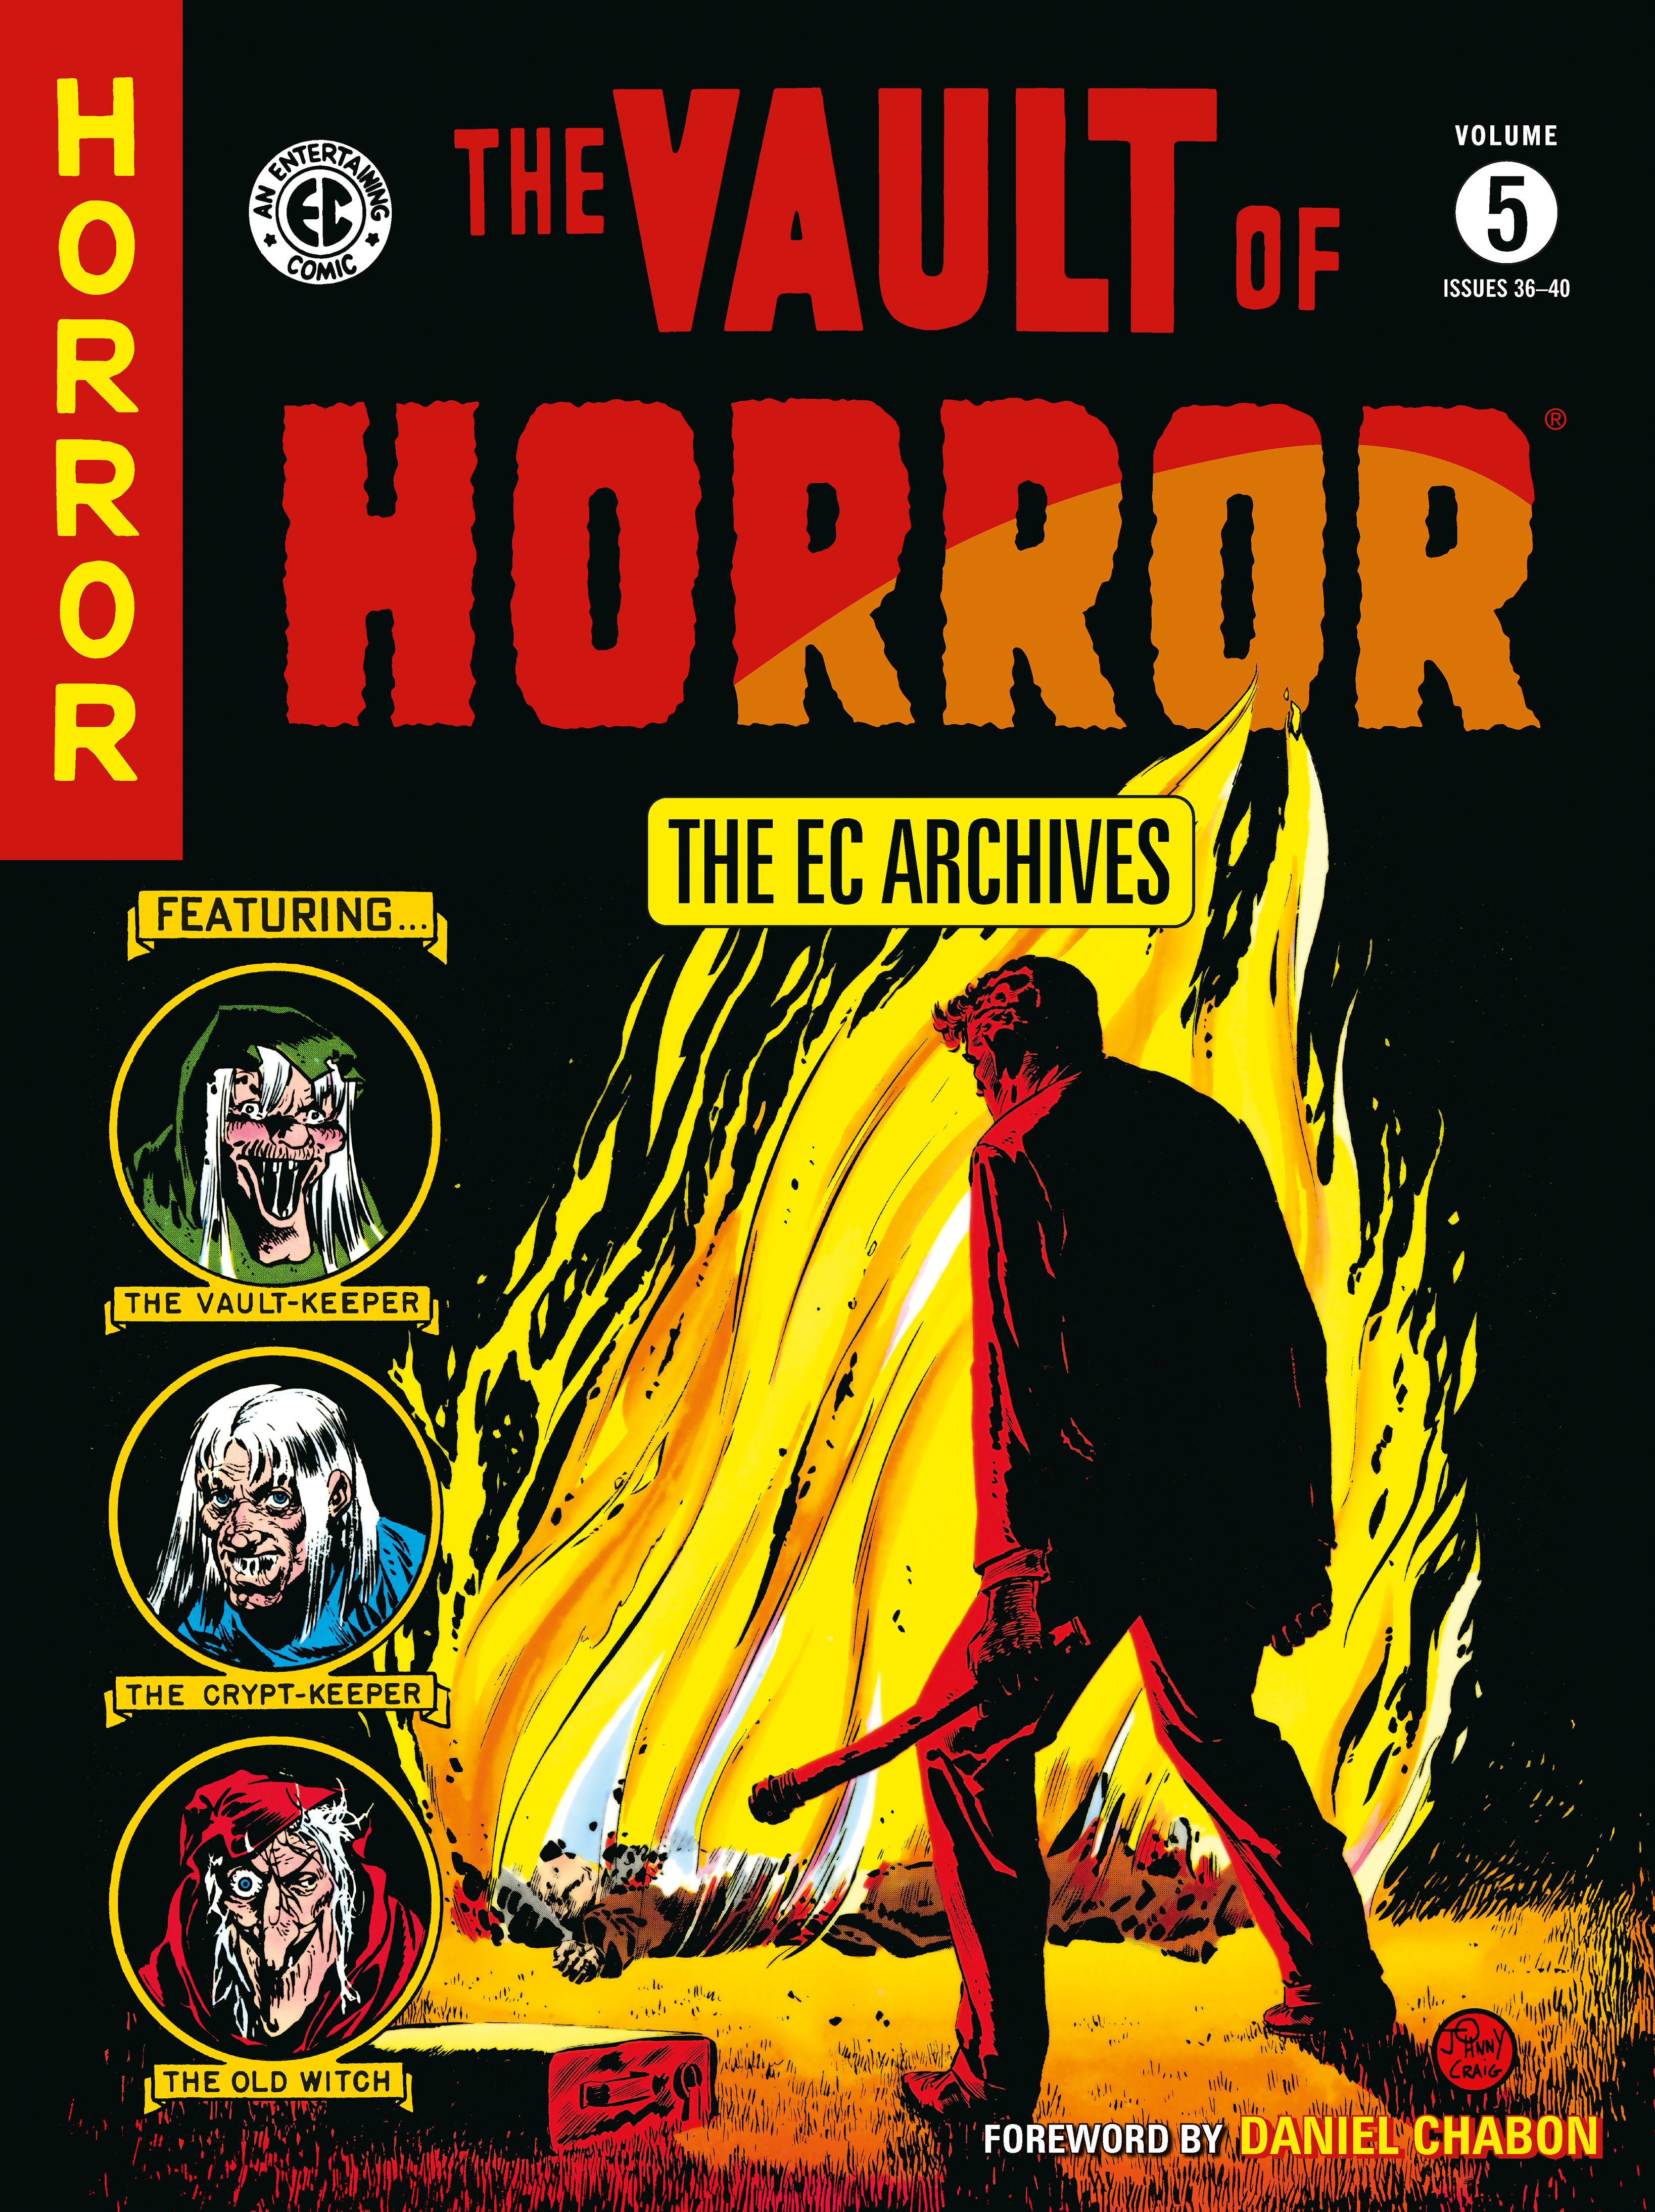 The EC Archives: The Vault Of Horror Volume 5 | BD Cosmos